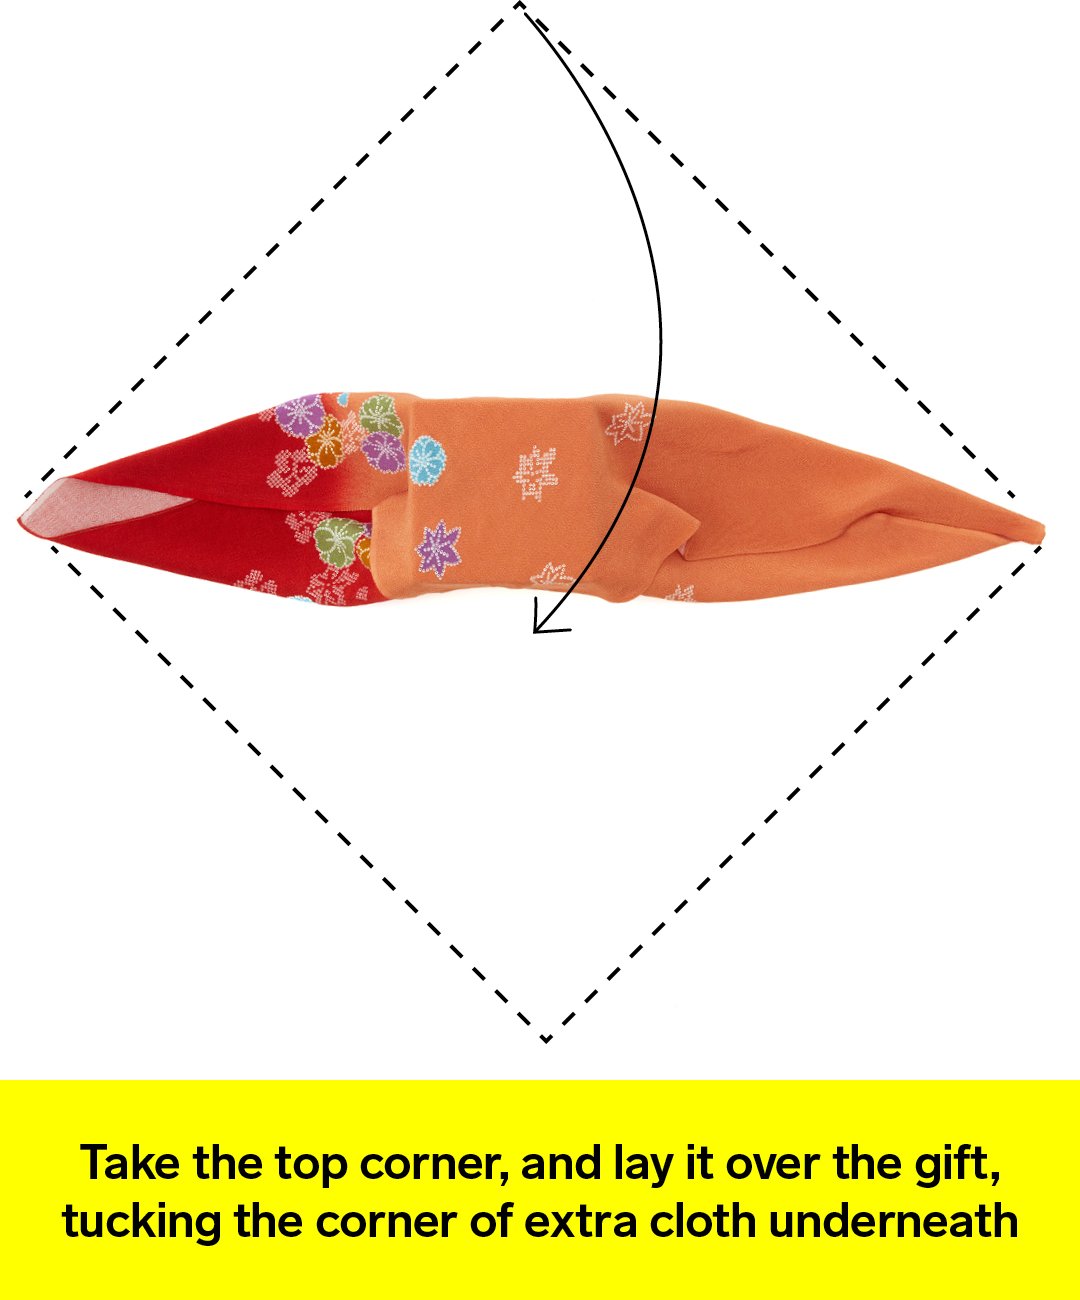 Graphic showing how to fold cloth over gift